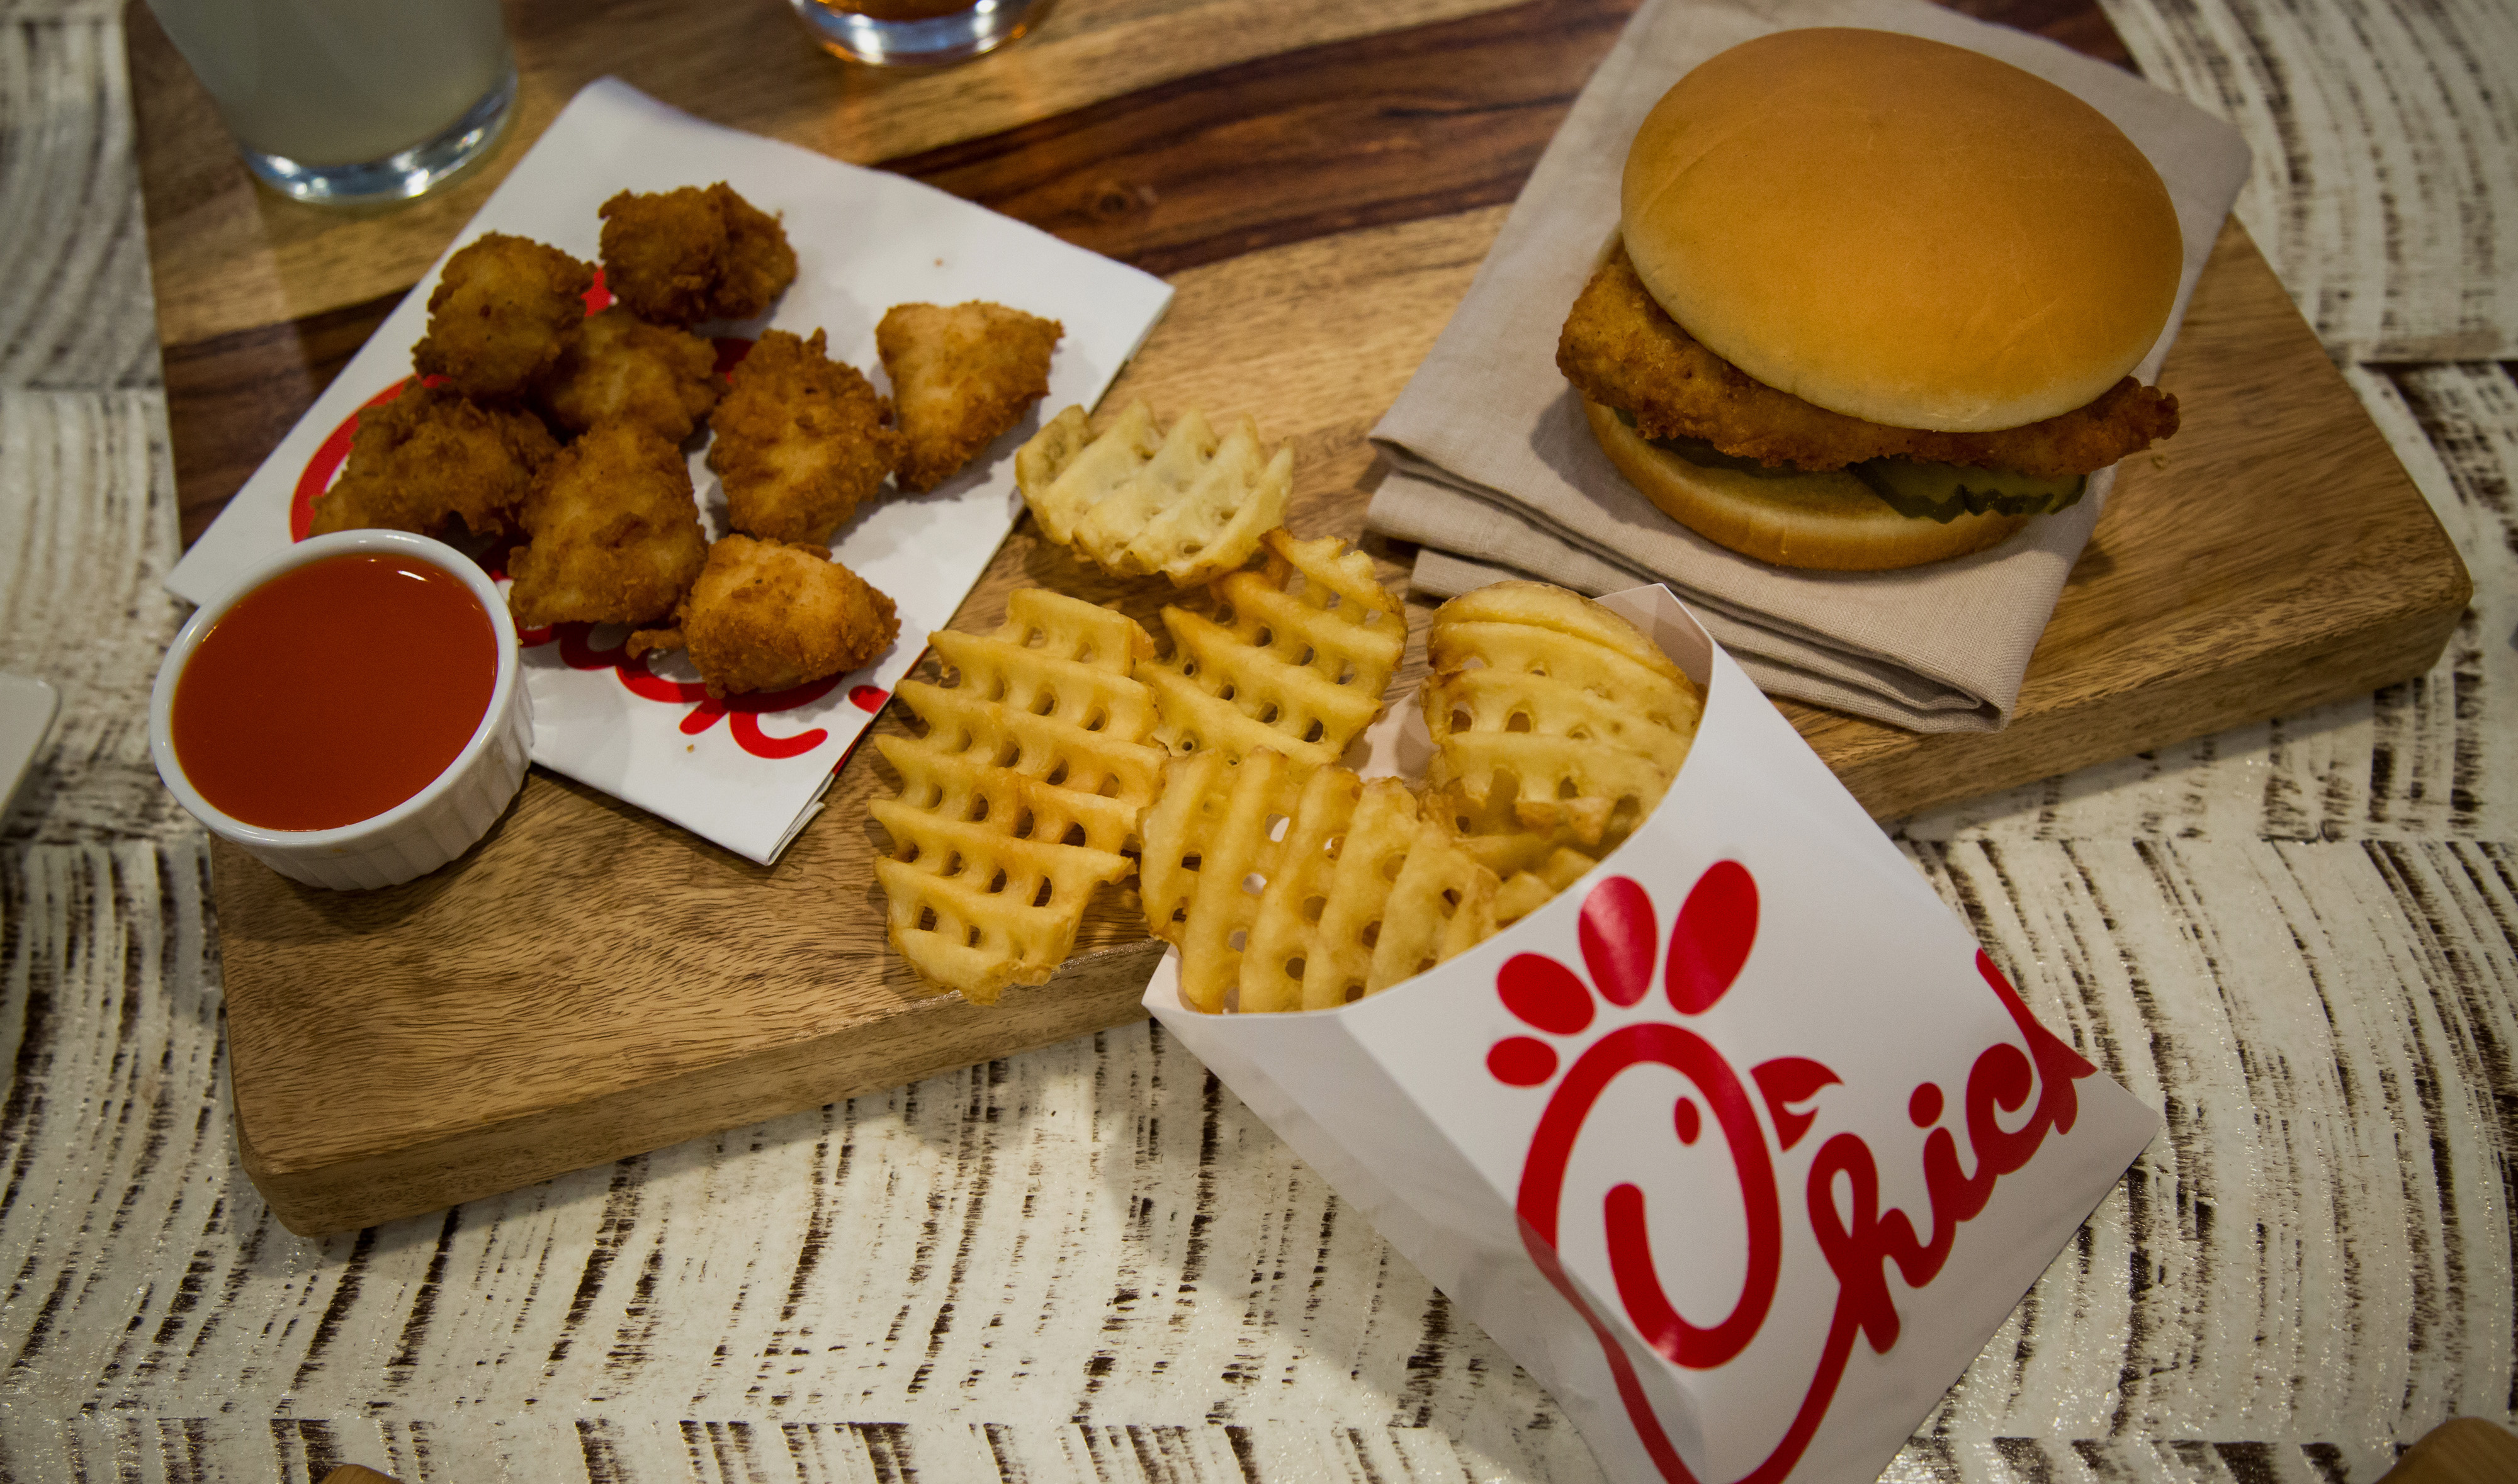 Getting a Chick-Fil-A franchise is harder than getting 